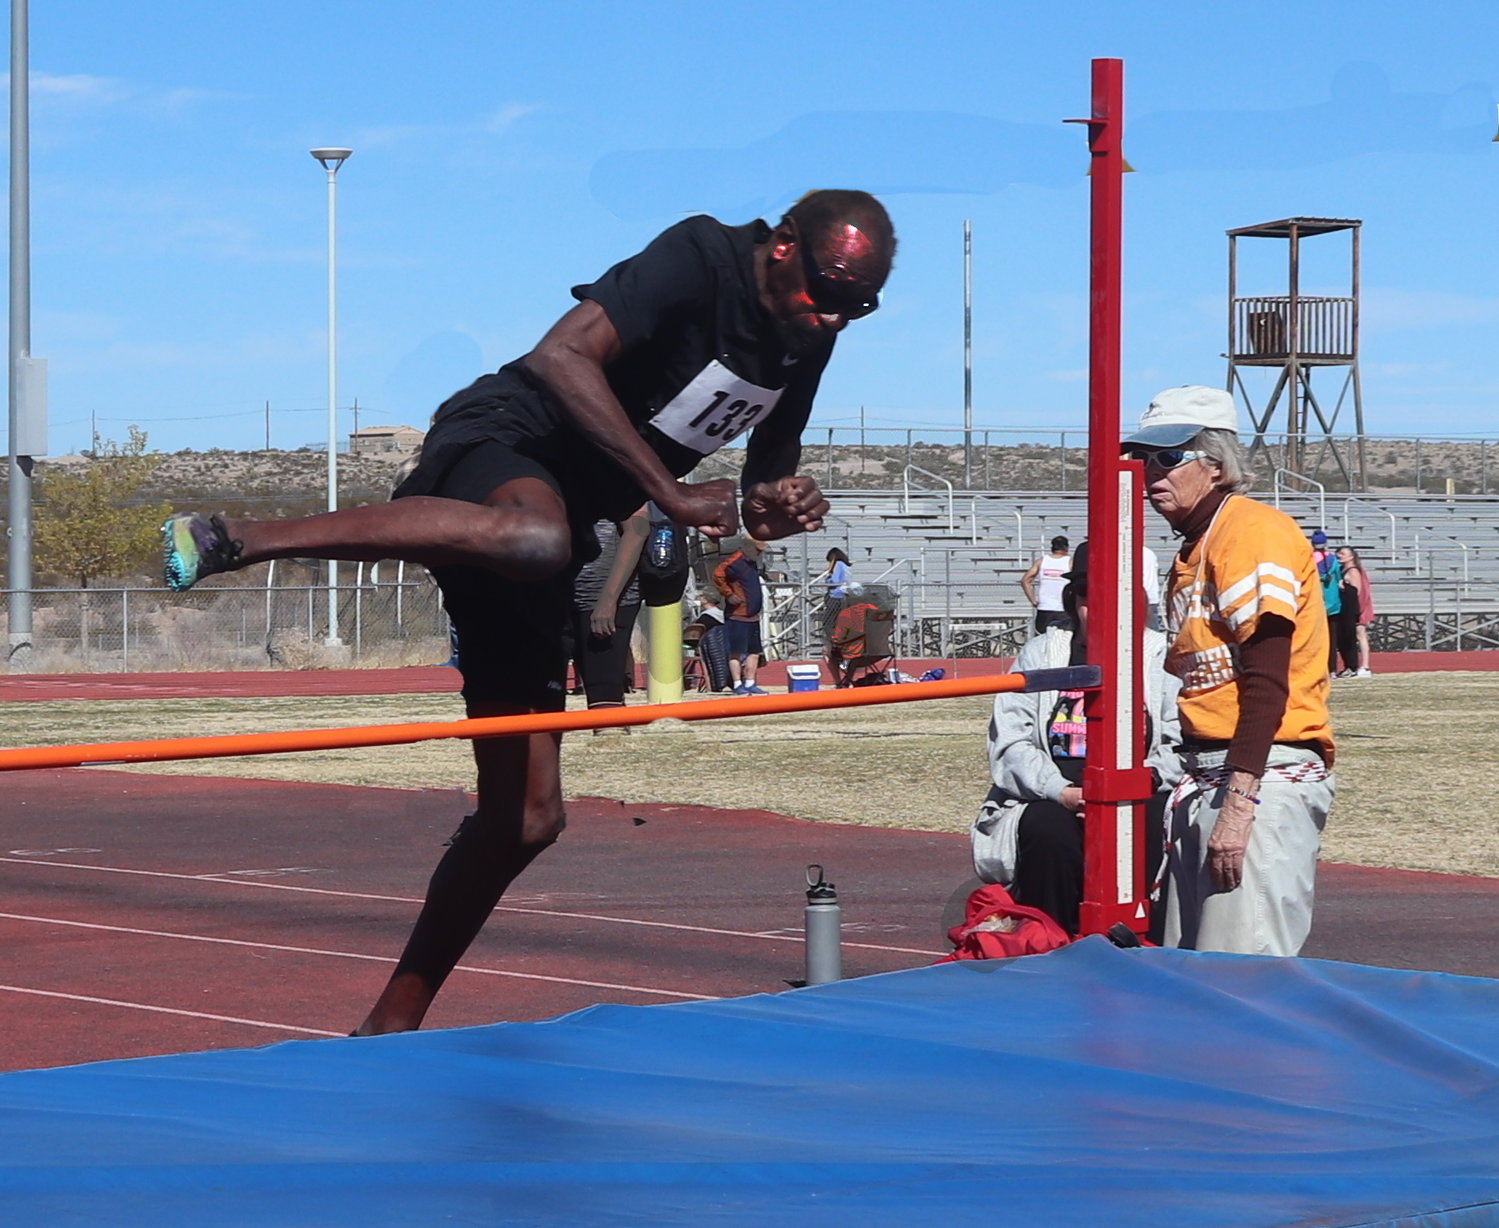 Eugene Pettes won first place in the high jump during Doña Ana County Senior Olympics competition April 1 at Centennial High School.